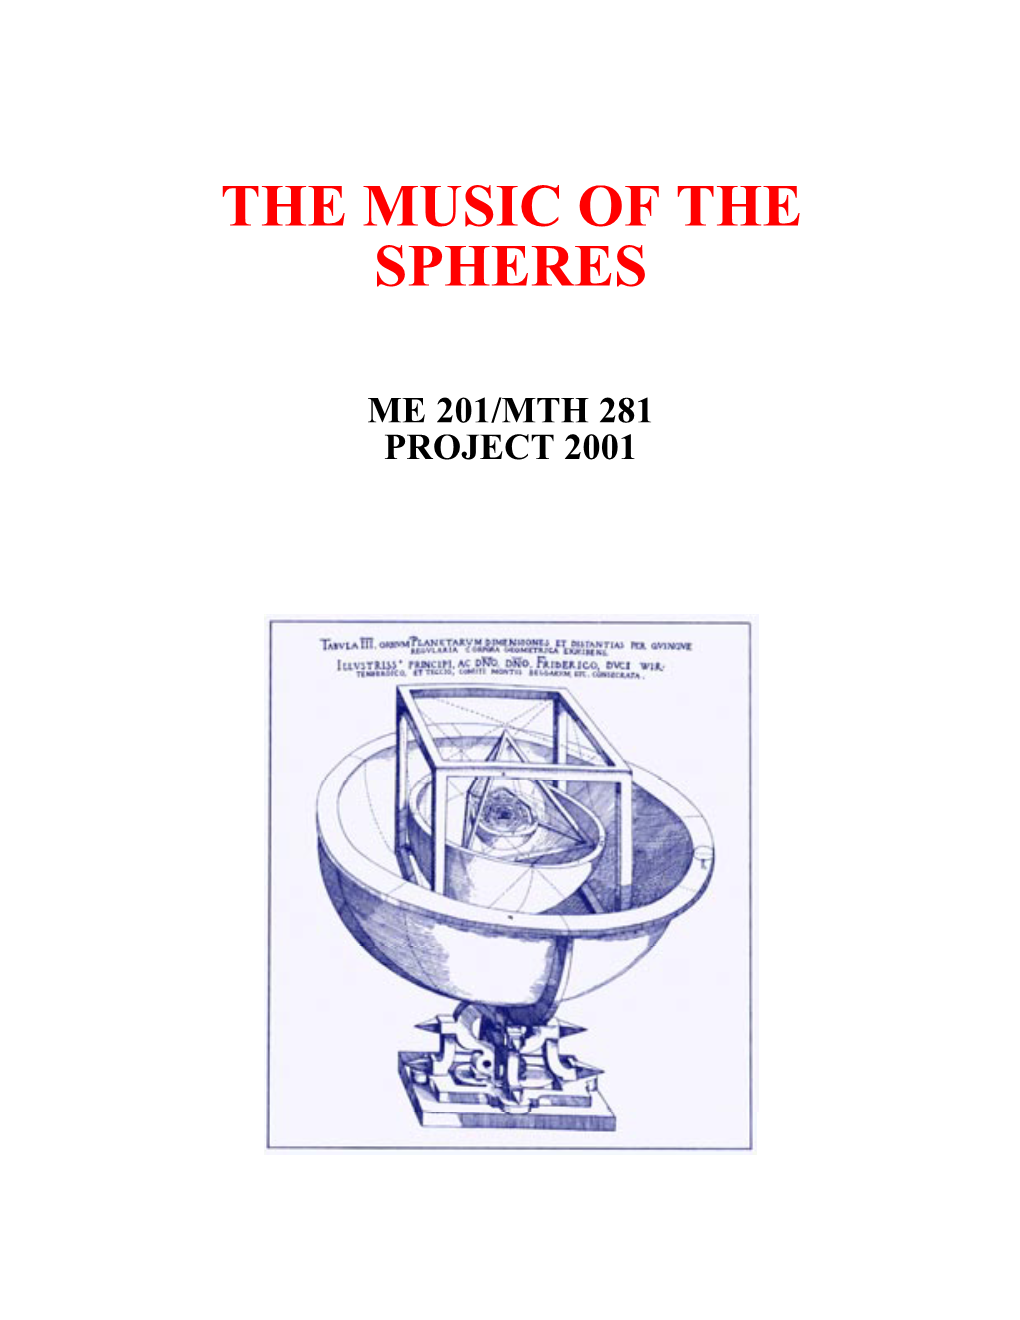 Project 2001: the Music of the Spheres